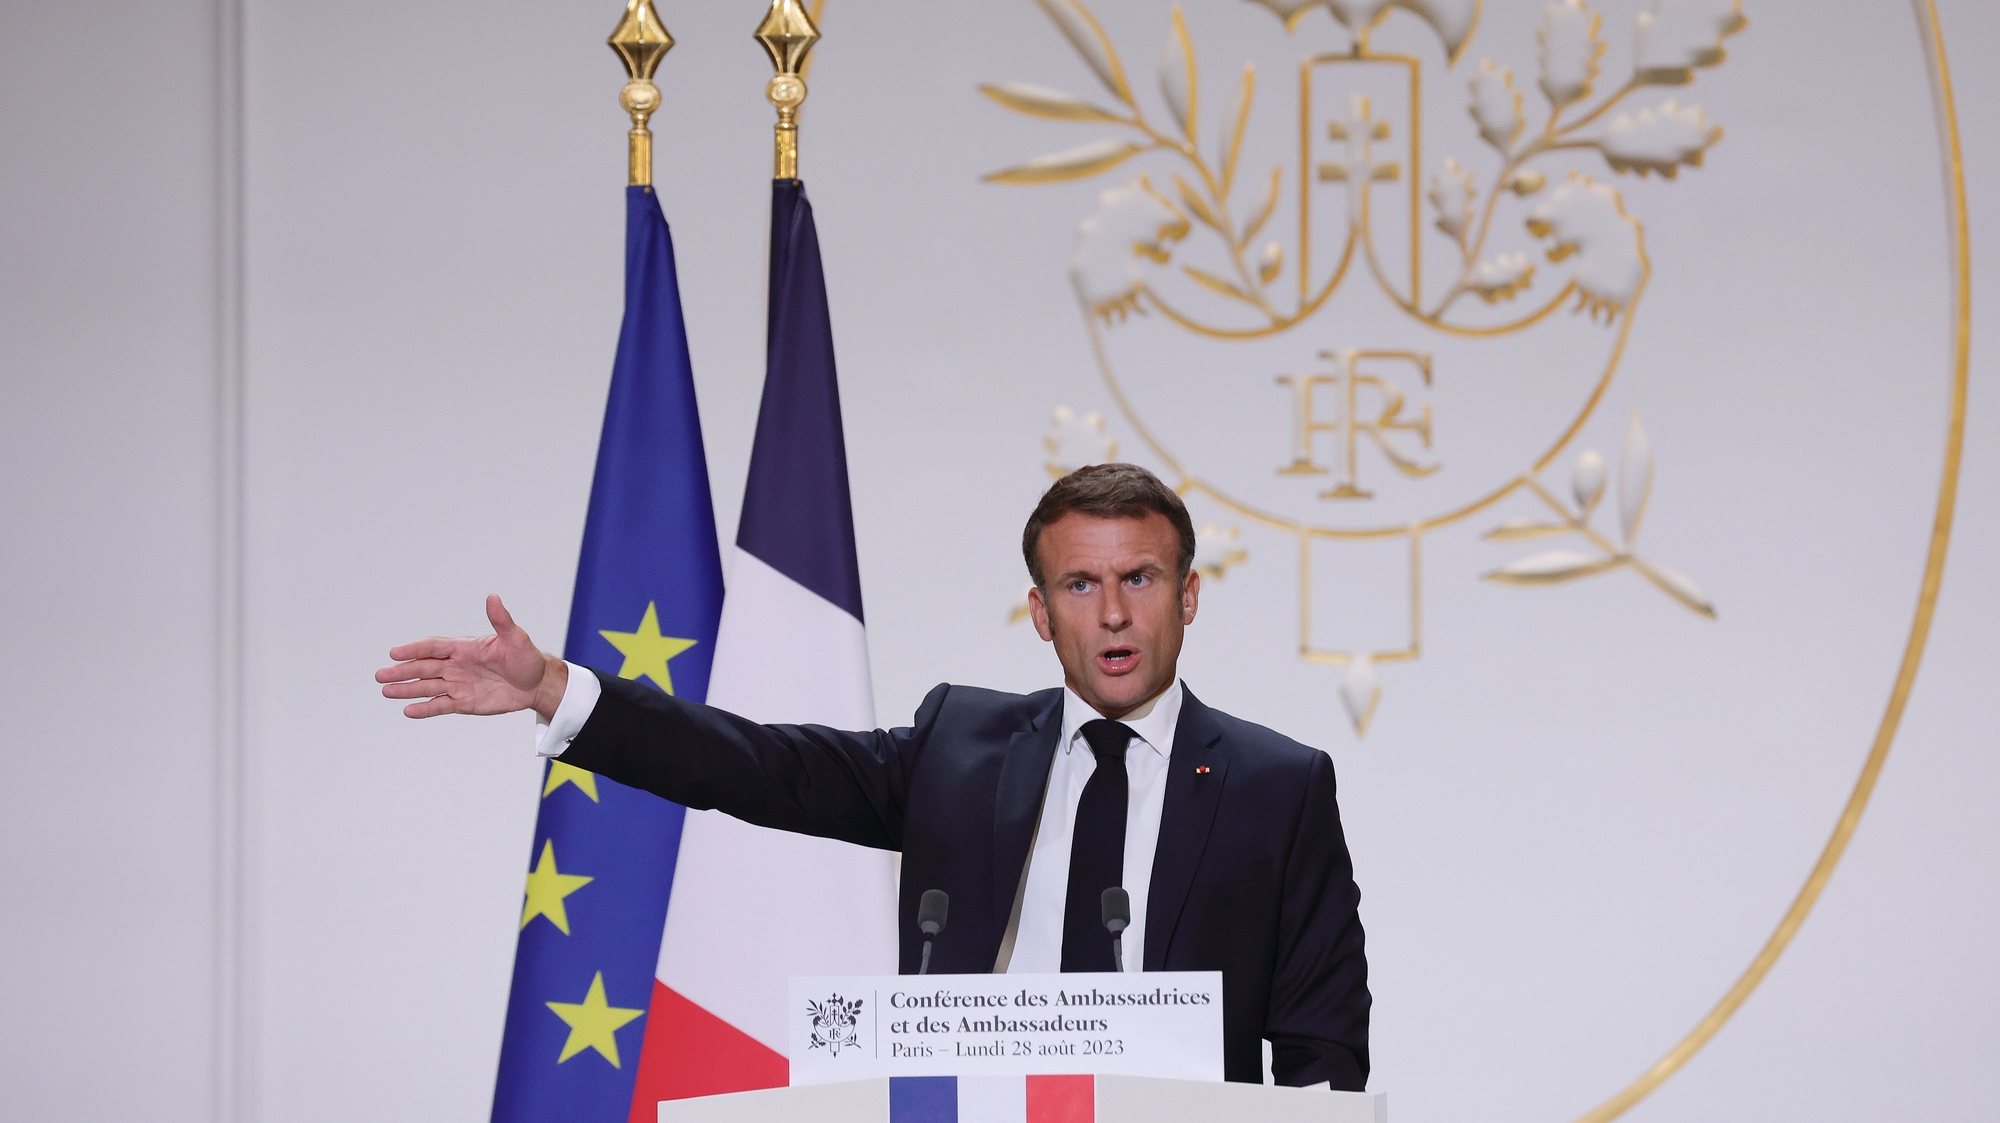 epa10825110 French President Emmanuel Macron speaks in front of French ambassadors during the conference of ambassadors at the Elysee Palace, Paris, France, 28 August 2023. Macron is expected to highlight France&#039;s foreign policy during the annual ambassadors&#039; conference.  EPA/TERESA SUAREZ / POOL